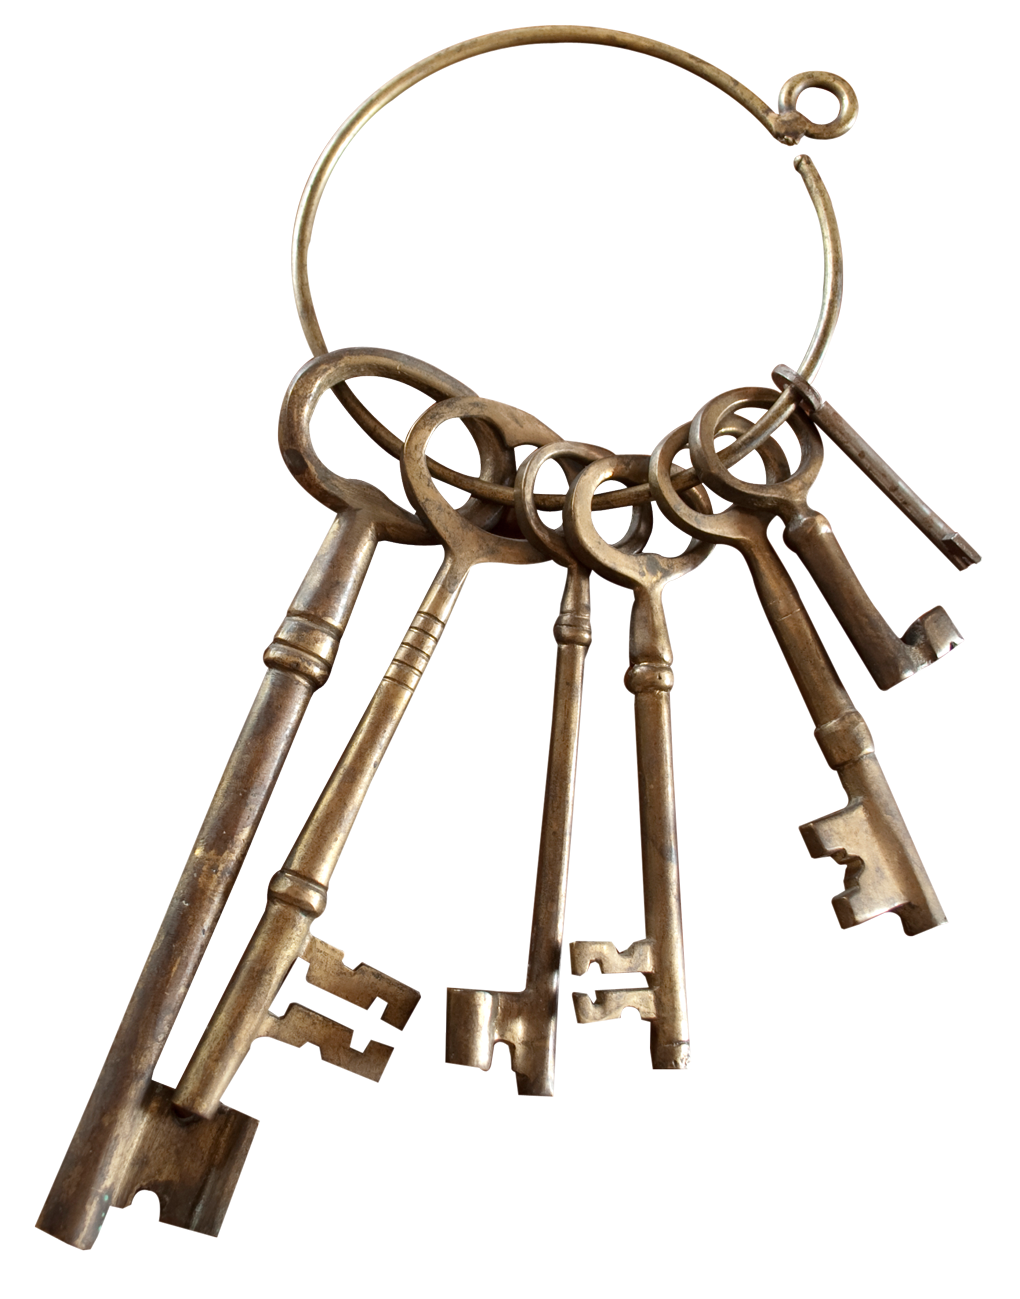 A Group Of Keys On A Ring